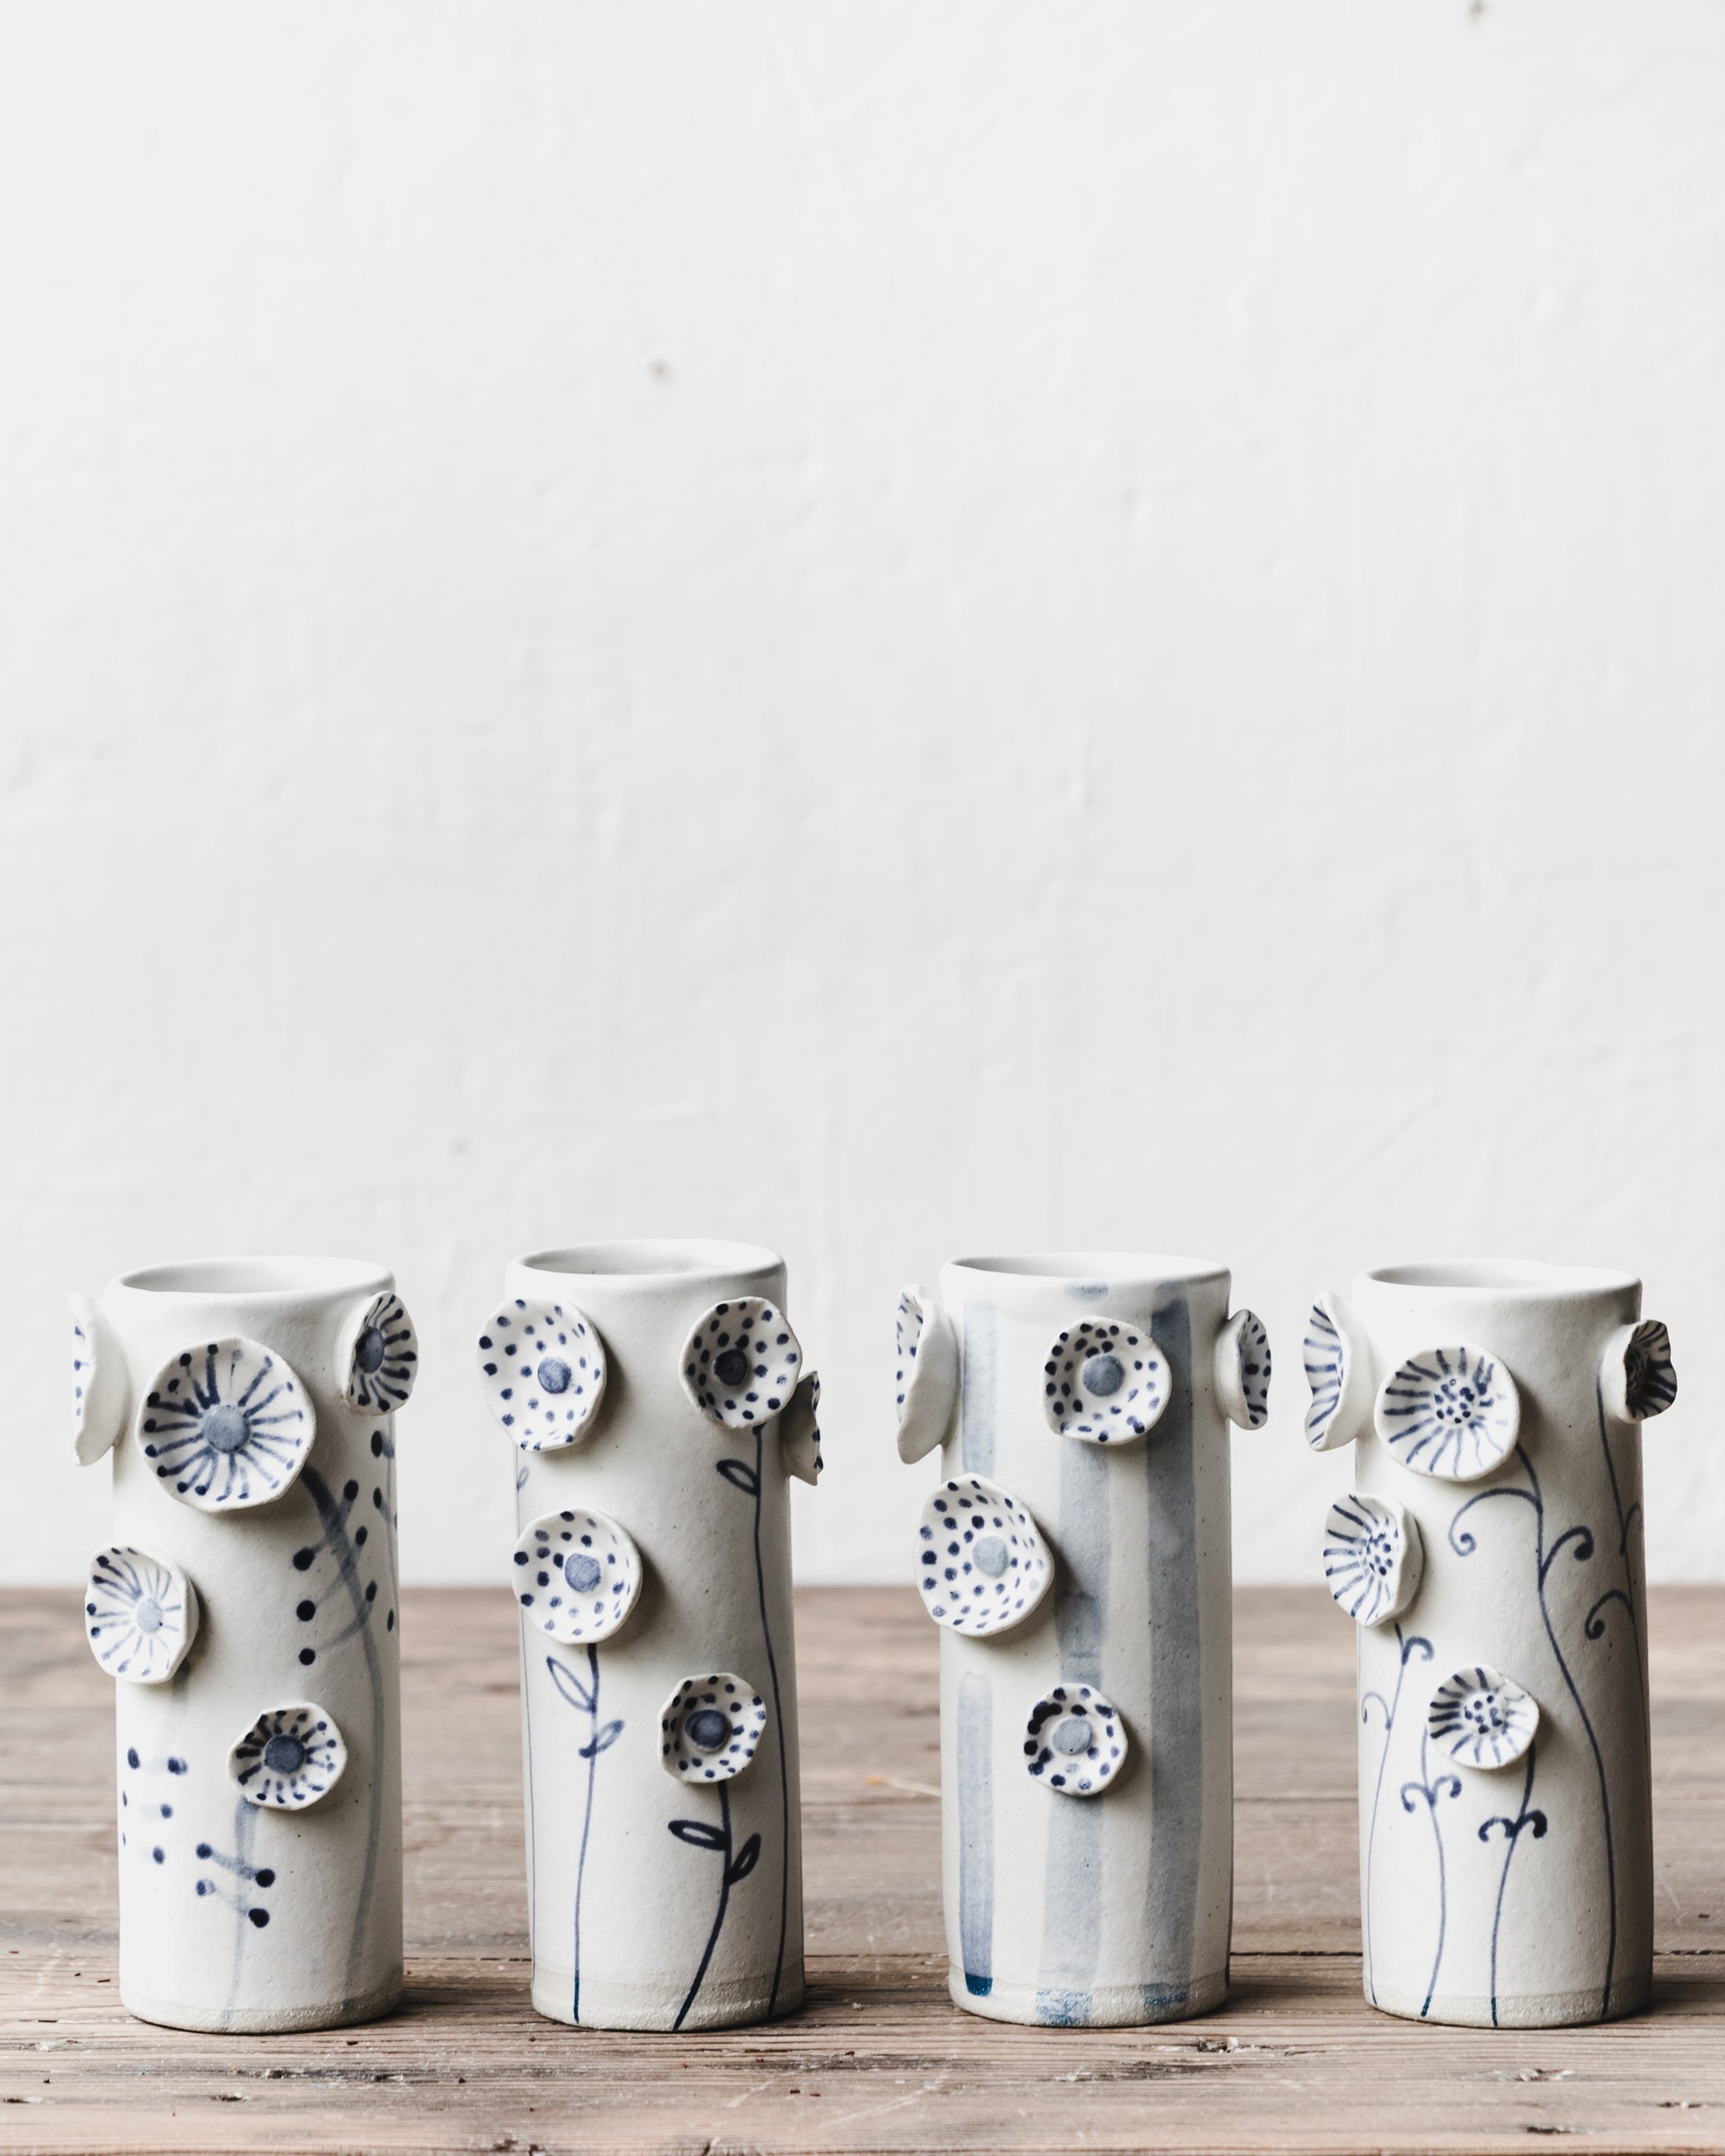 Flower vases with blue and white stem and line decorations by clay beehive ceramics